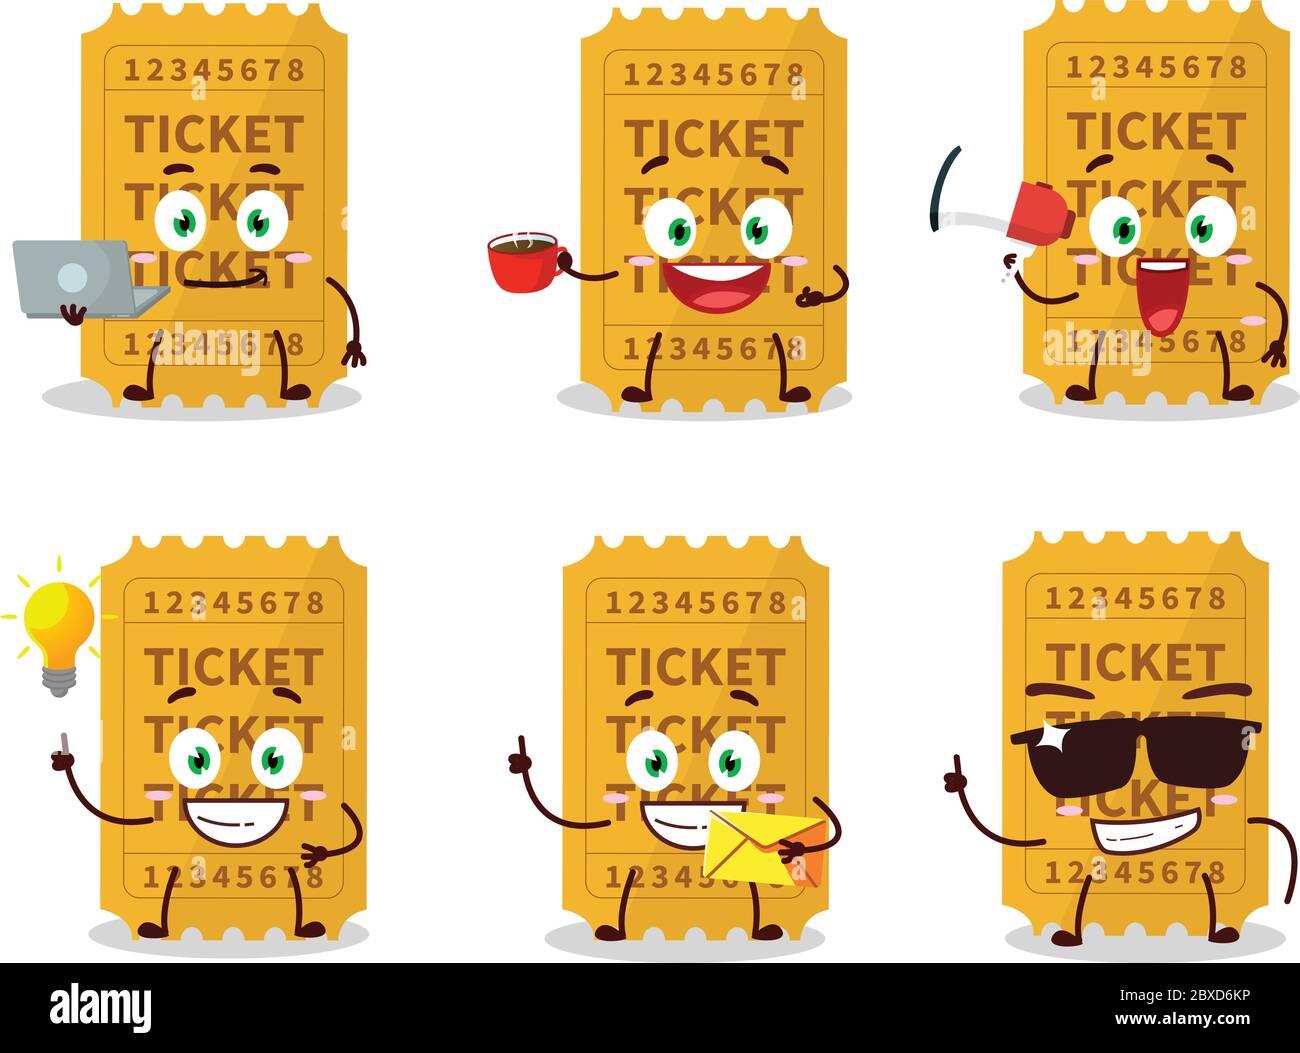 Ticket cartoon character with various types of business emoticons Stock Vector